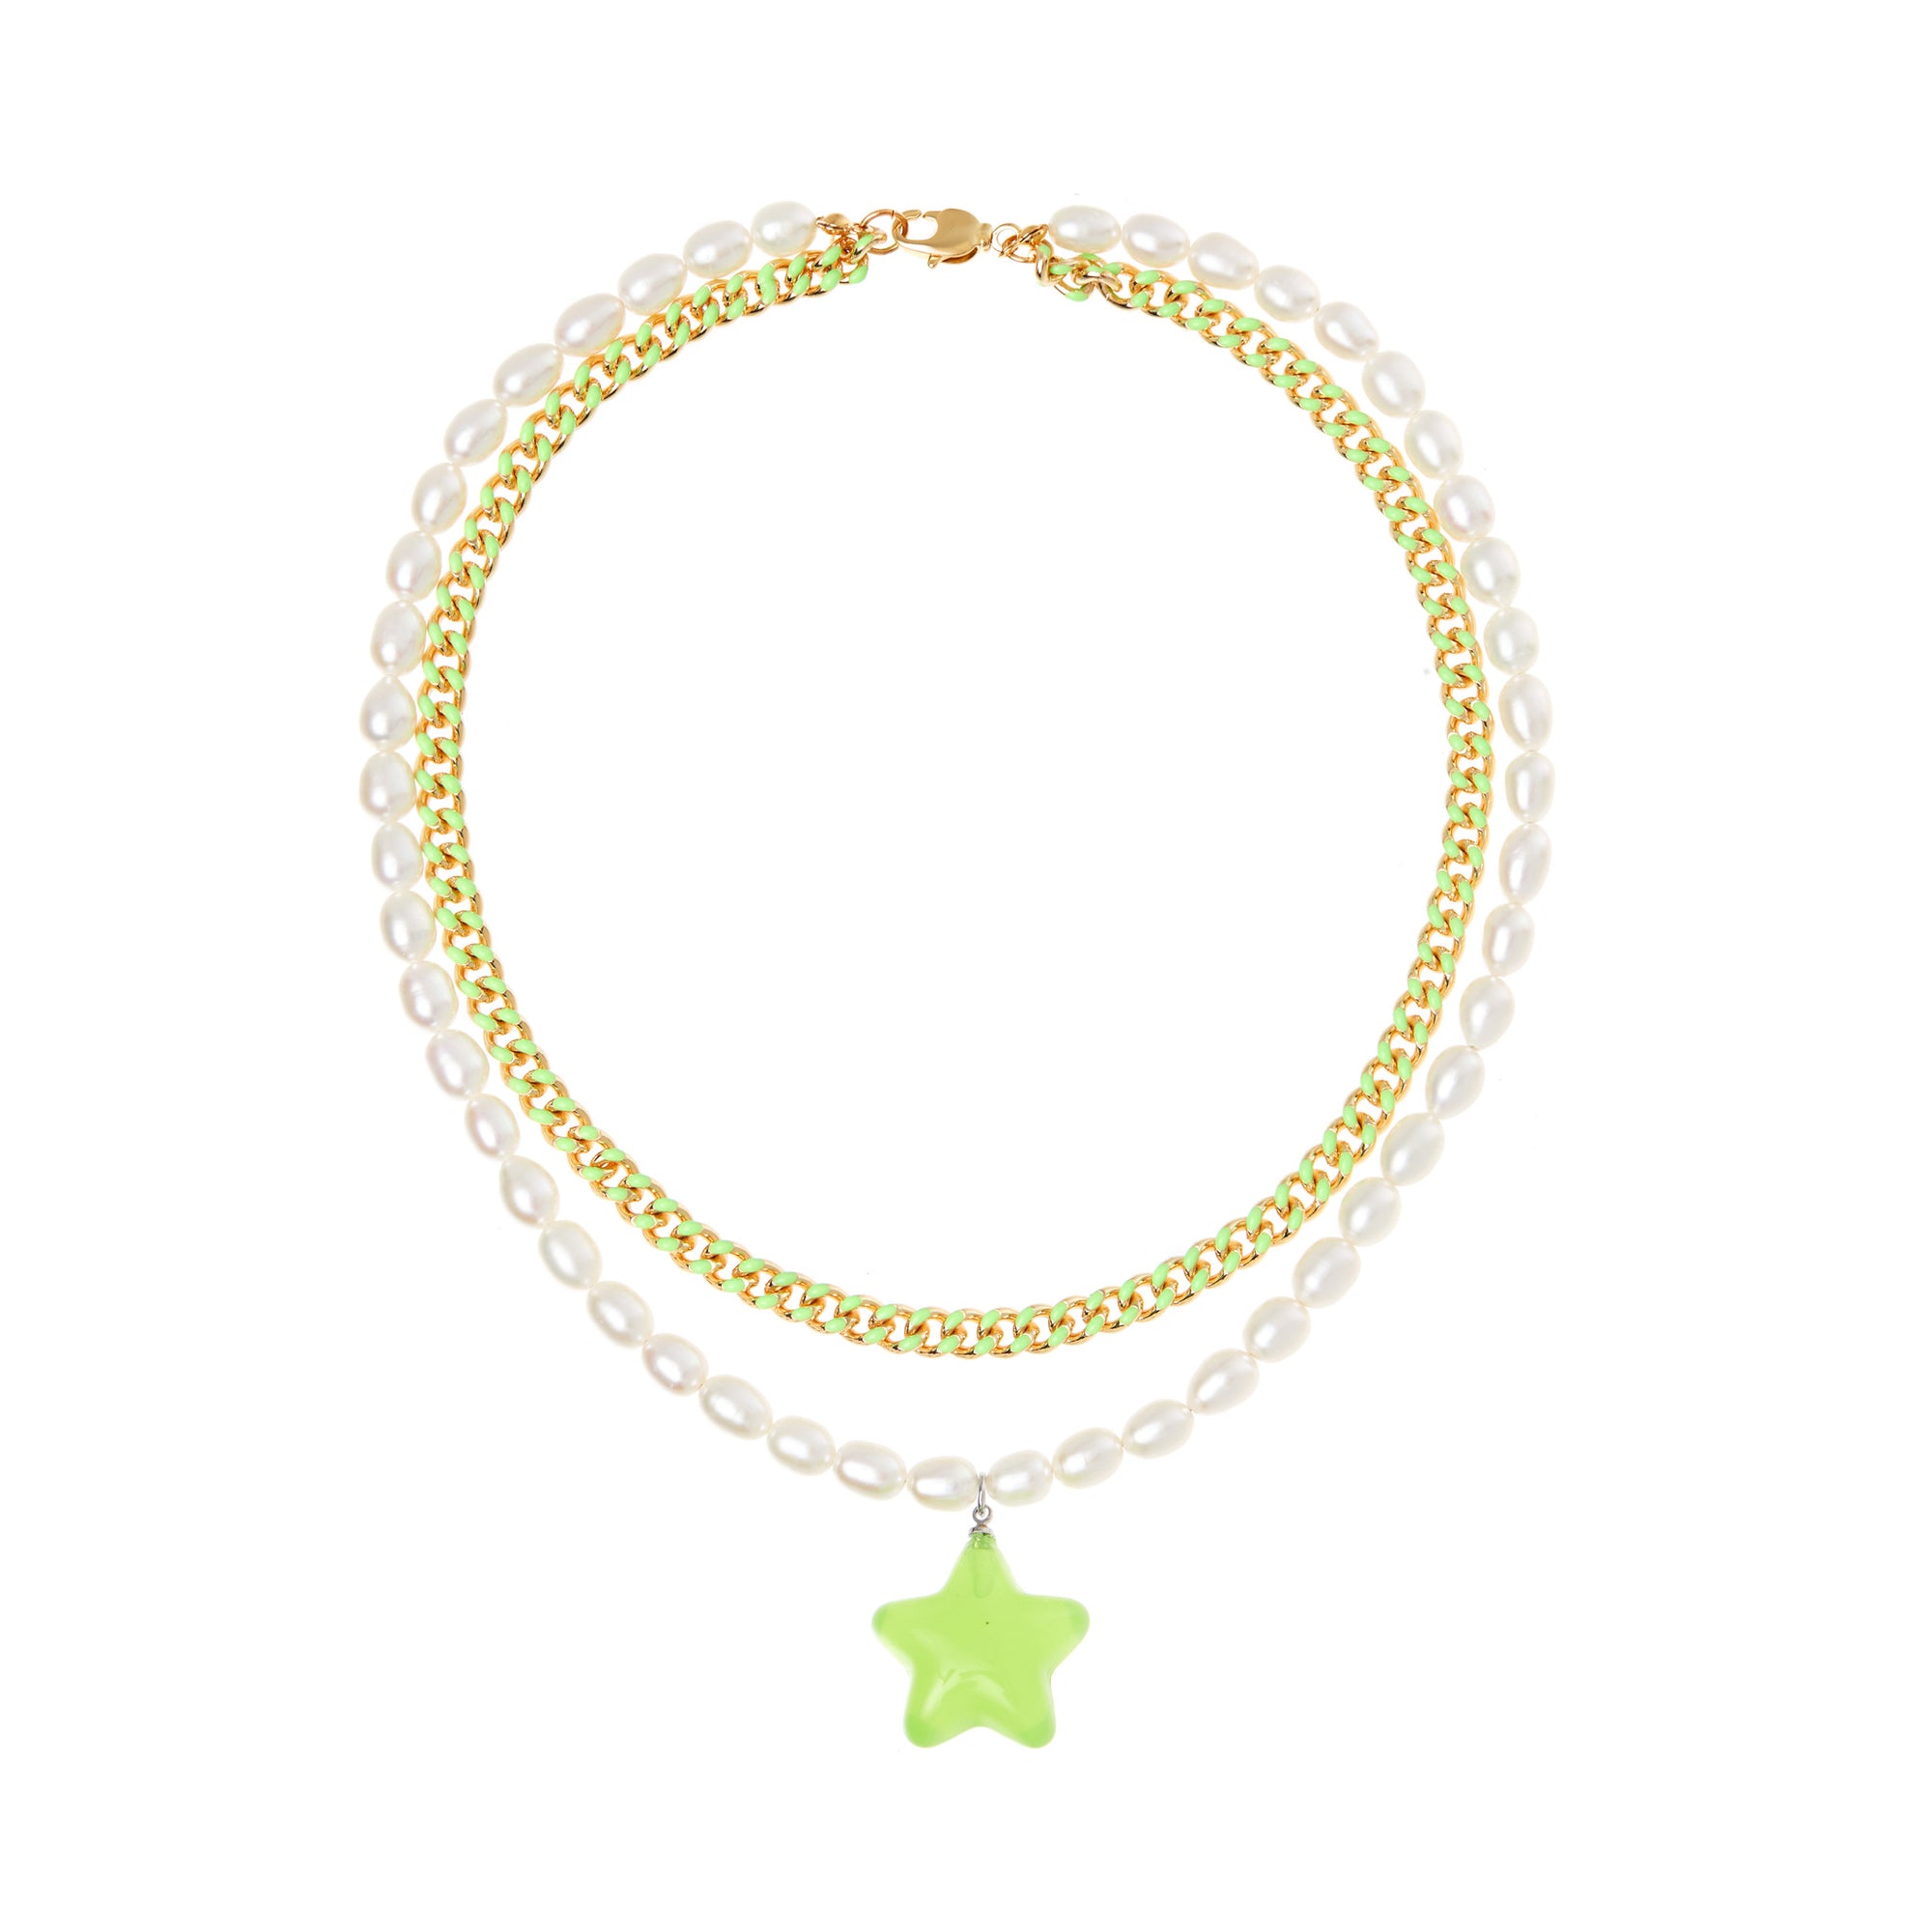 Necklace 'Neon Star' – Green